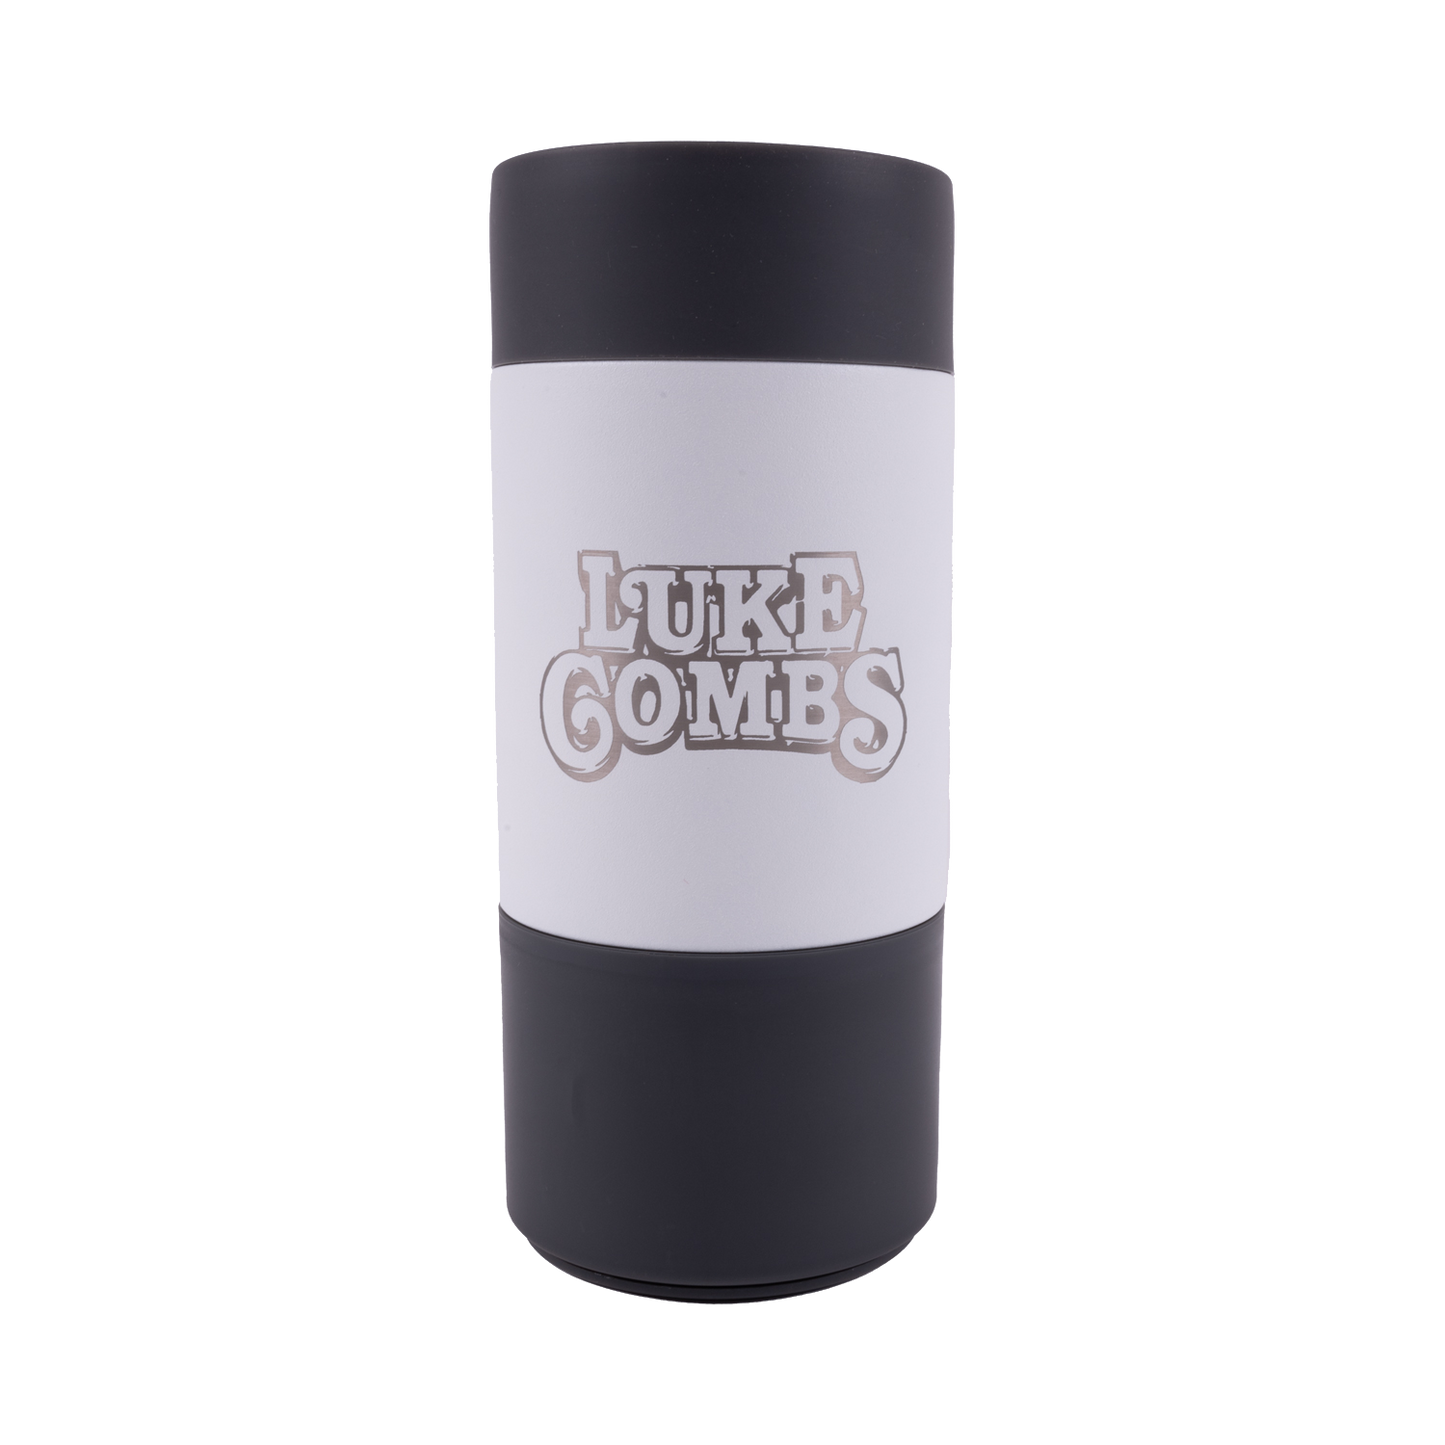 Toadfish Outfitters x Luke Combs "Anchor" Cup Holder